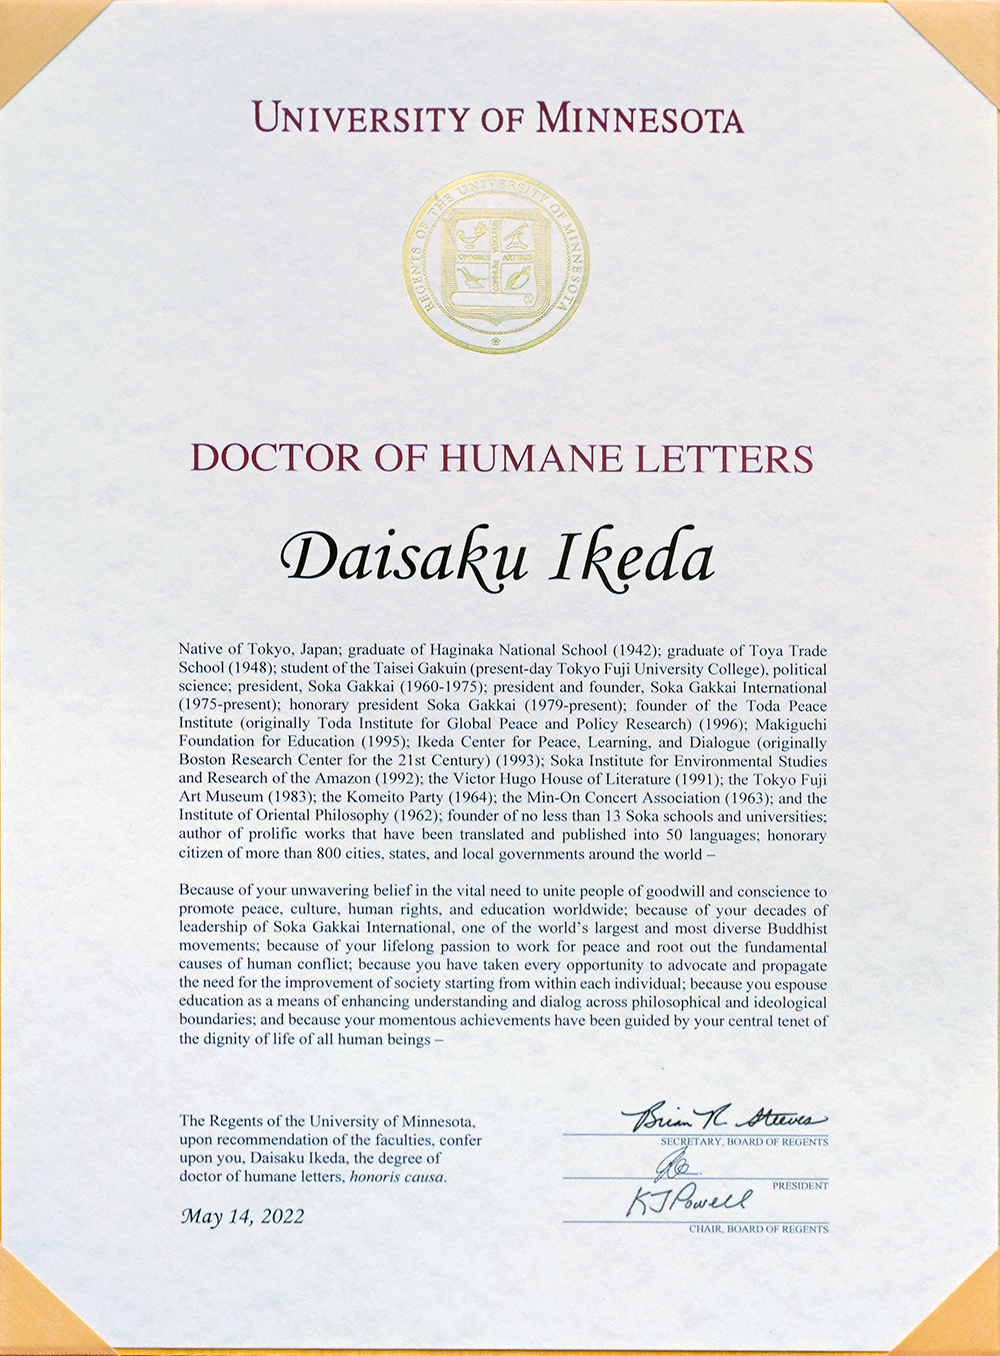 Doctor of Humane Letters, honoris causa, received by Daisaku Ikeda